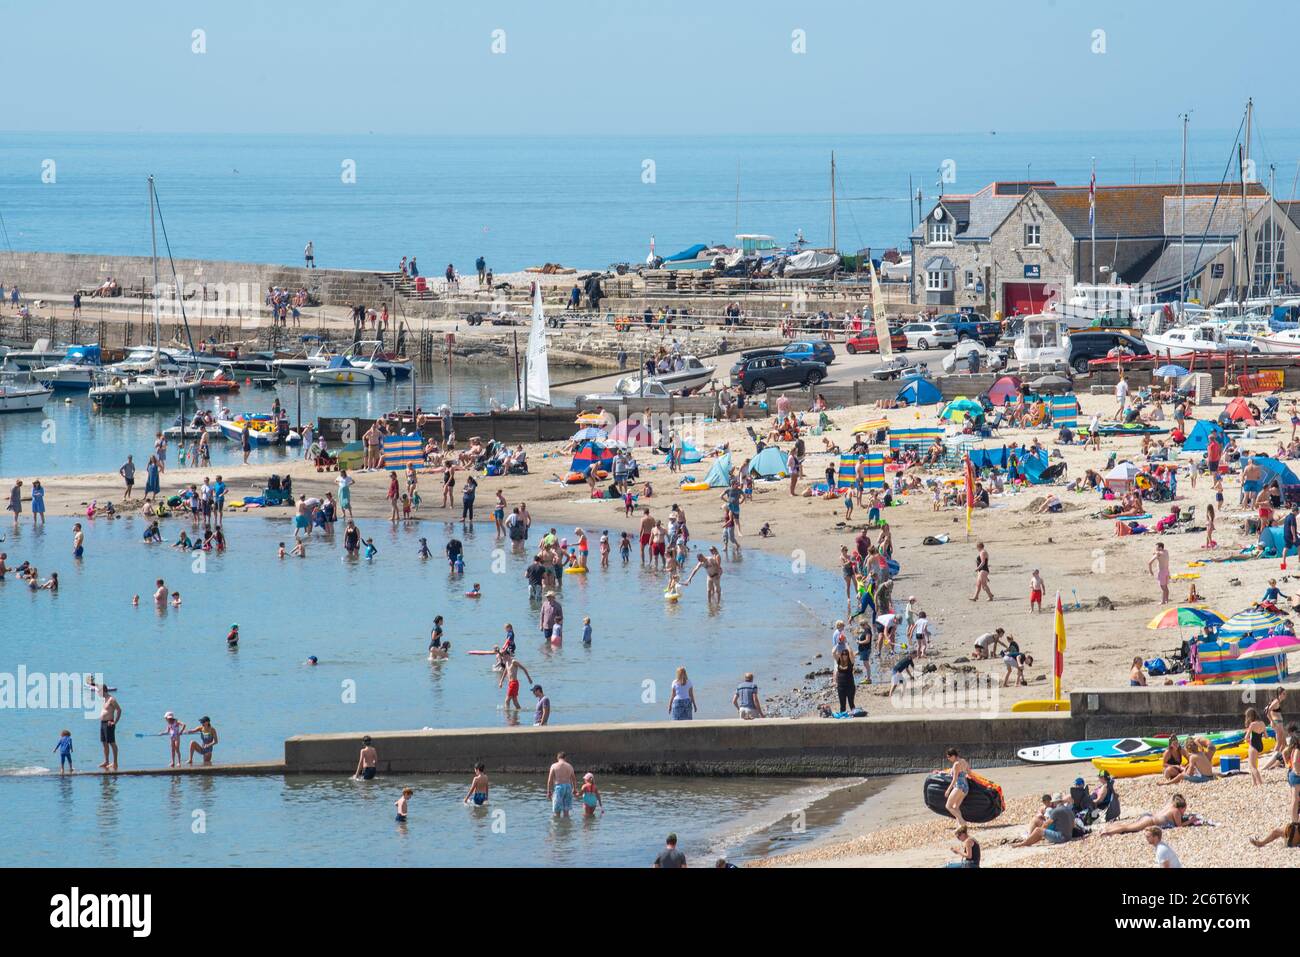 Lyme Regis, Dorset, UK. 12th July, 2020. UK Weather: Crowds of beachgoers flock to the picturesque seaside resort of Lyme Regis to soak up the scorching hot sunshine. Families, visitors and sunseekers packed out the beach this weekend to enjoy the best of the sunny weather as tourists make a wlecome return to the popular resort. Credit: Celia McMahon/Alamy Live News Stock Photo